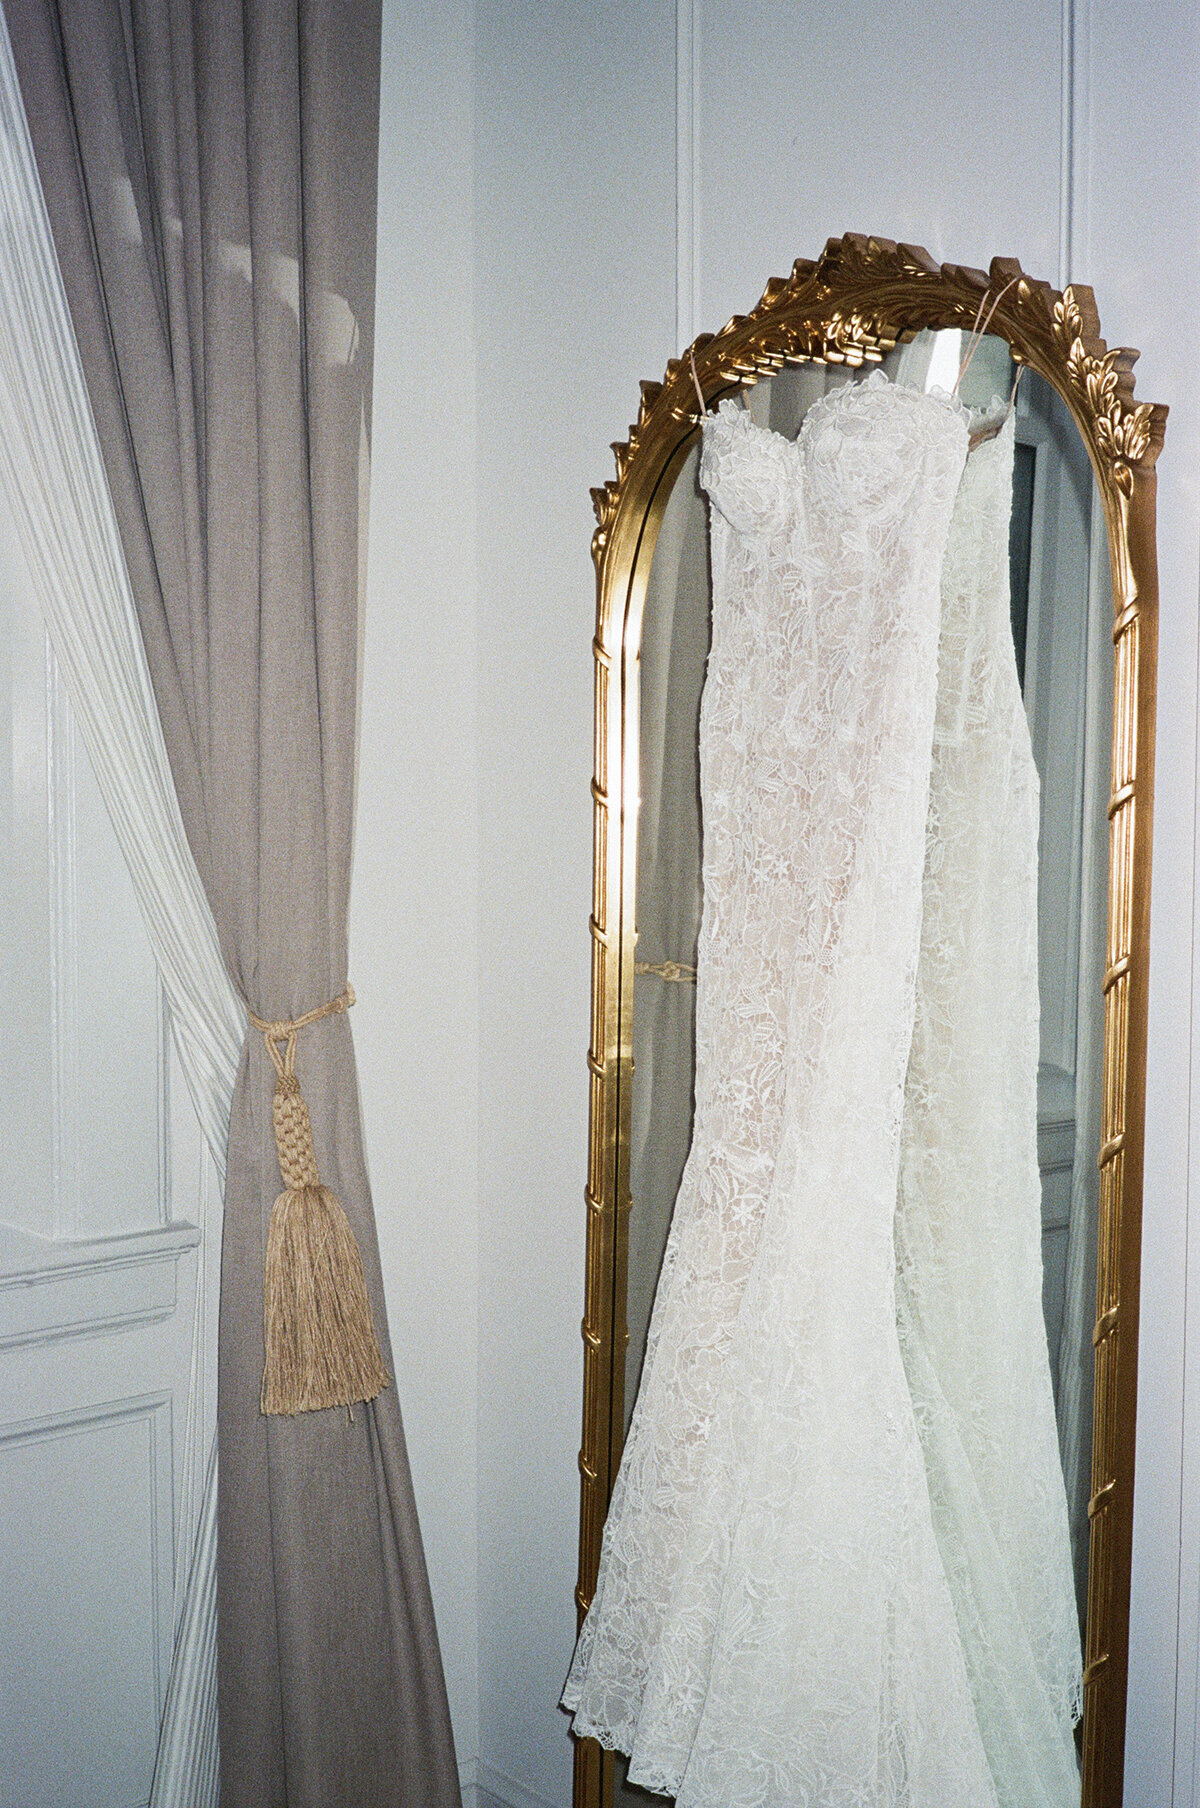 Sumner + Scott - New Orleans Museum of Art Wedding - Luxury Event Planning by Michelle Norwood - 1